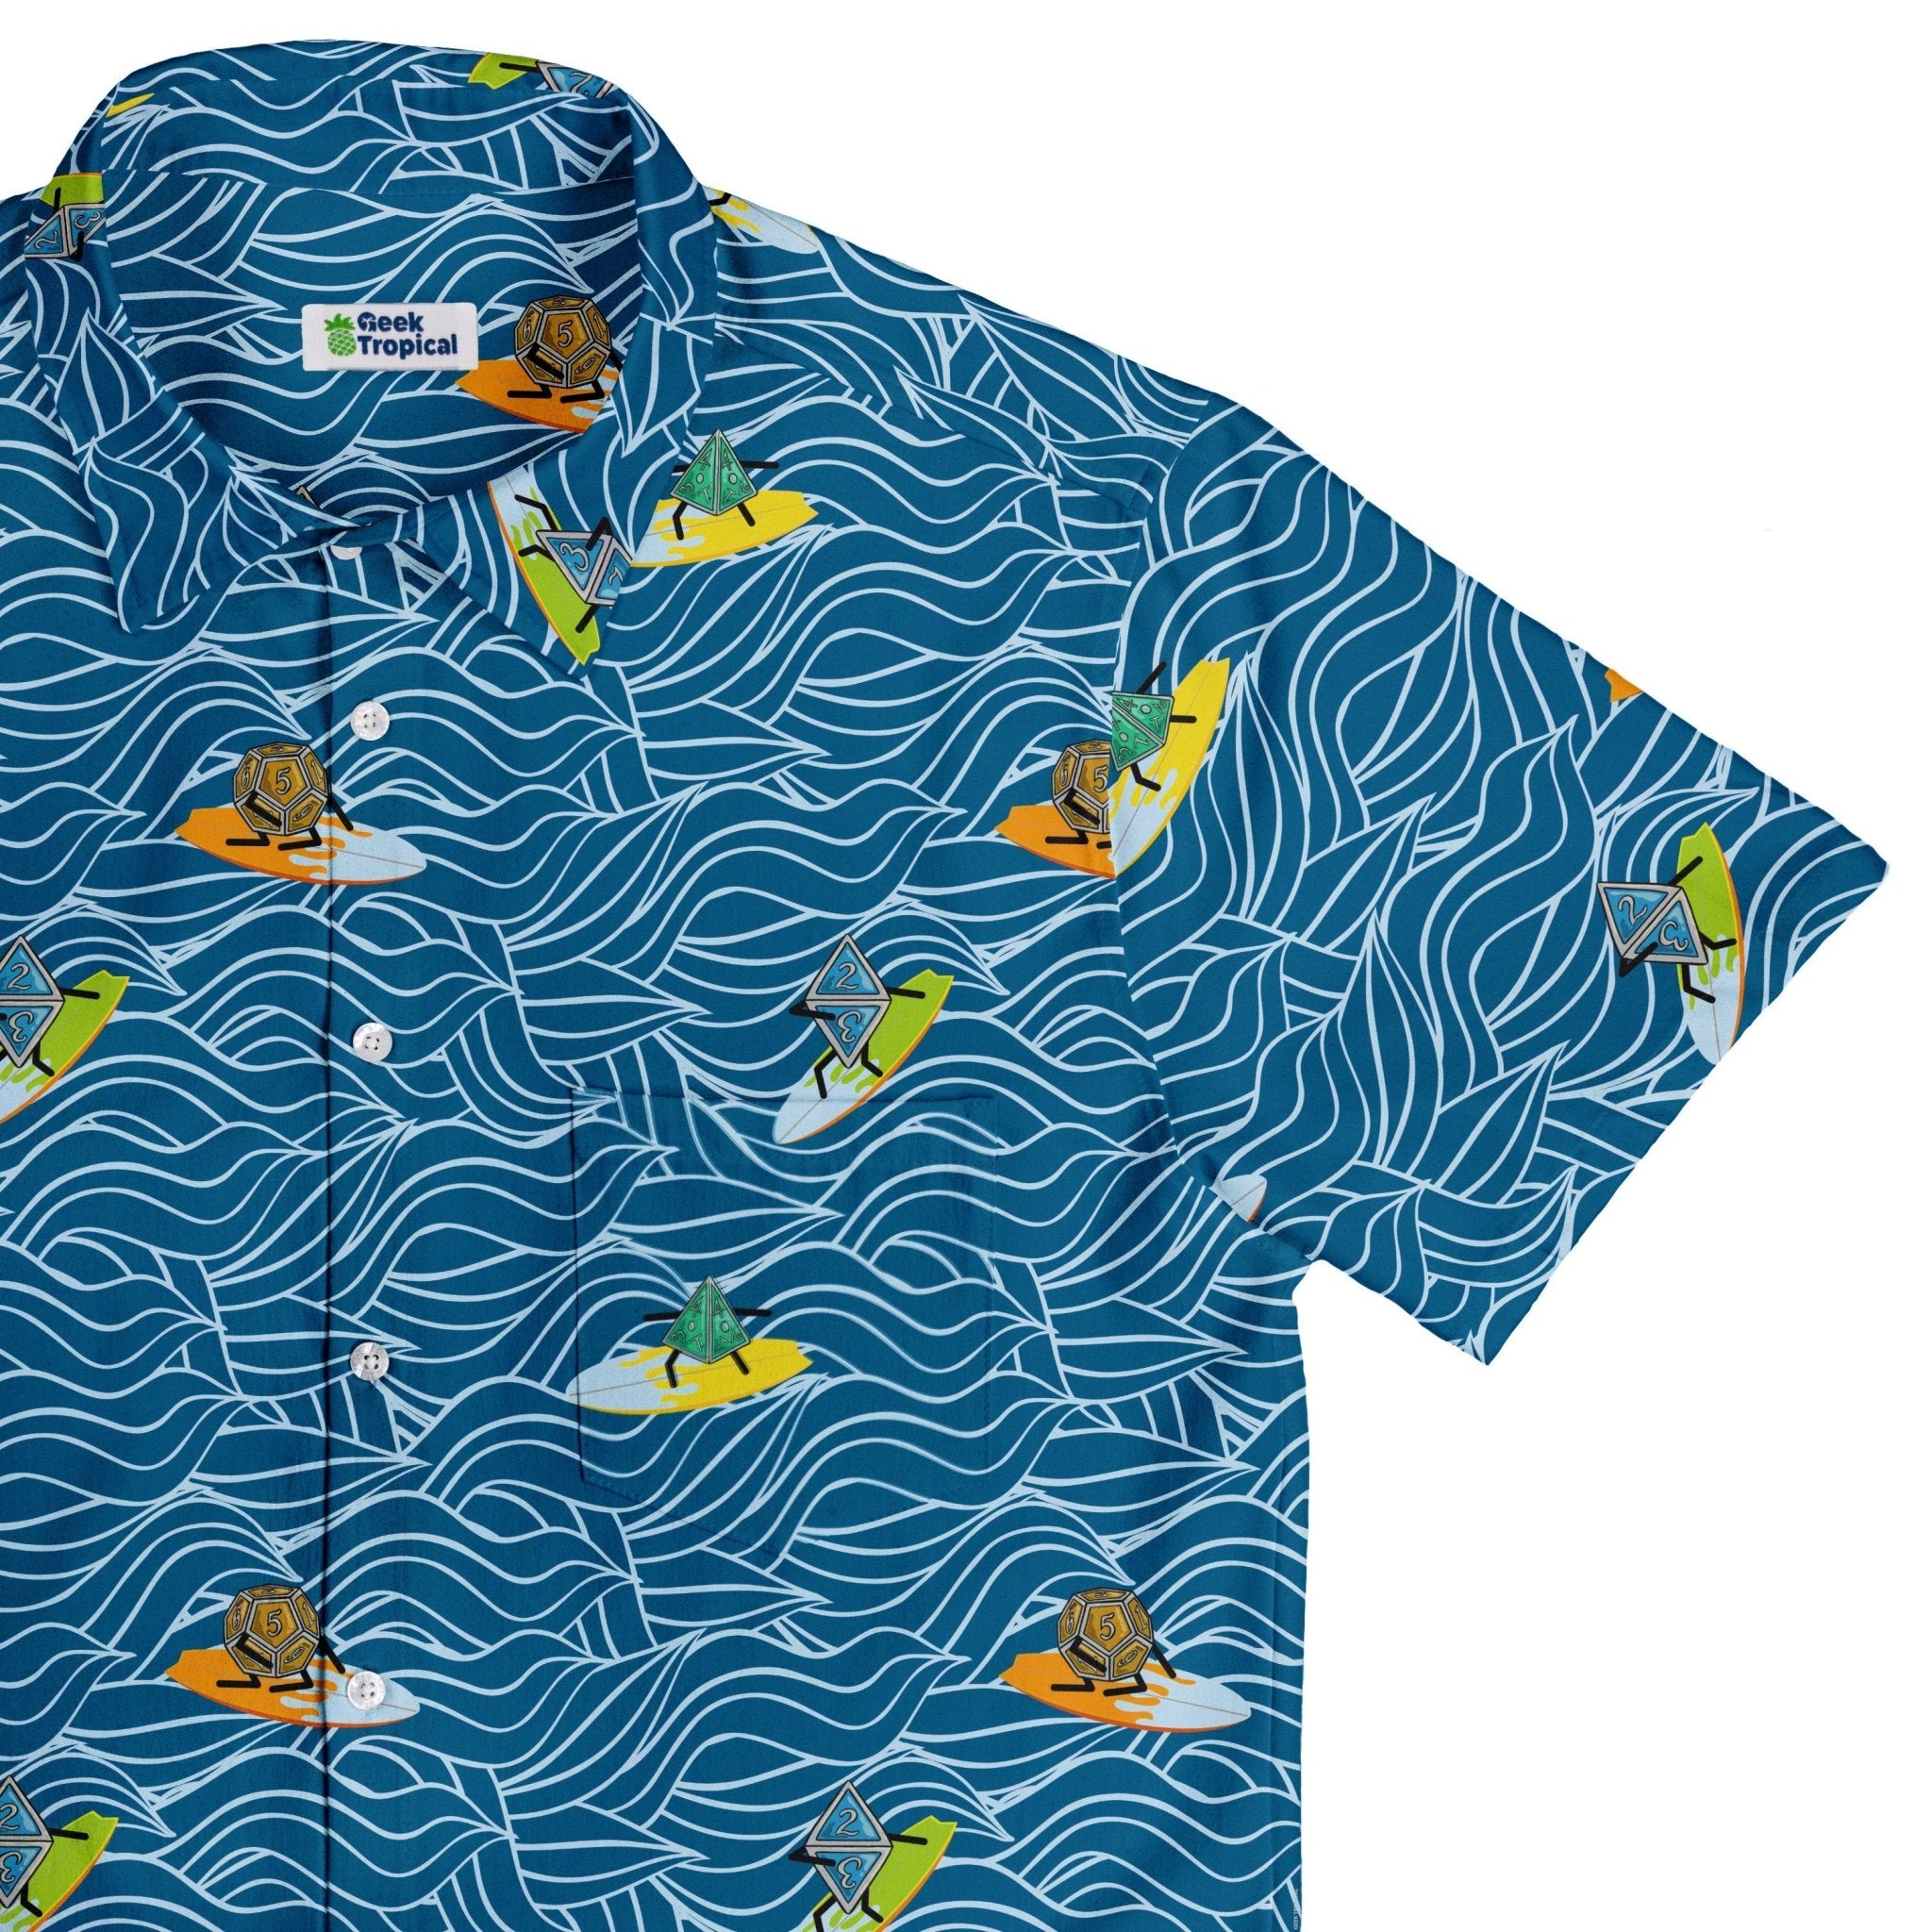 Surf and Roll Dnd Dice Button Up Shirt - adult sizing - Design by Dunking Toast - dnd & rpg print